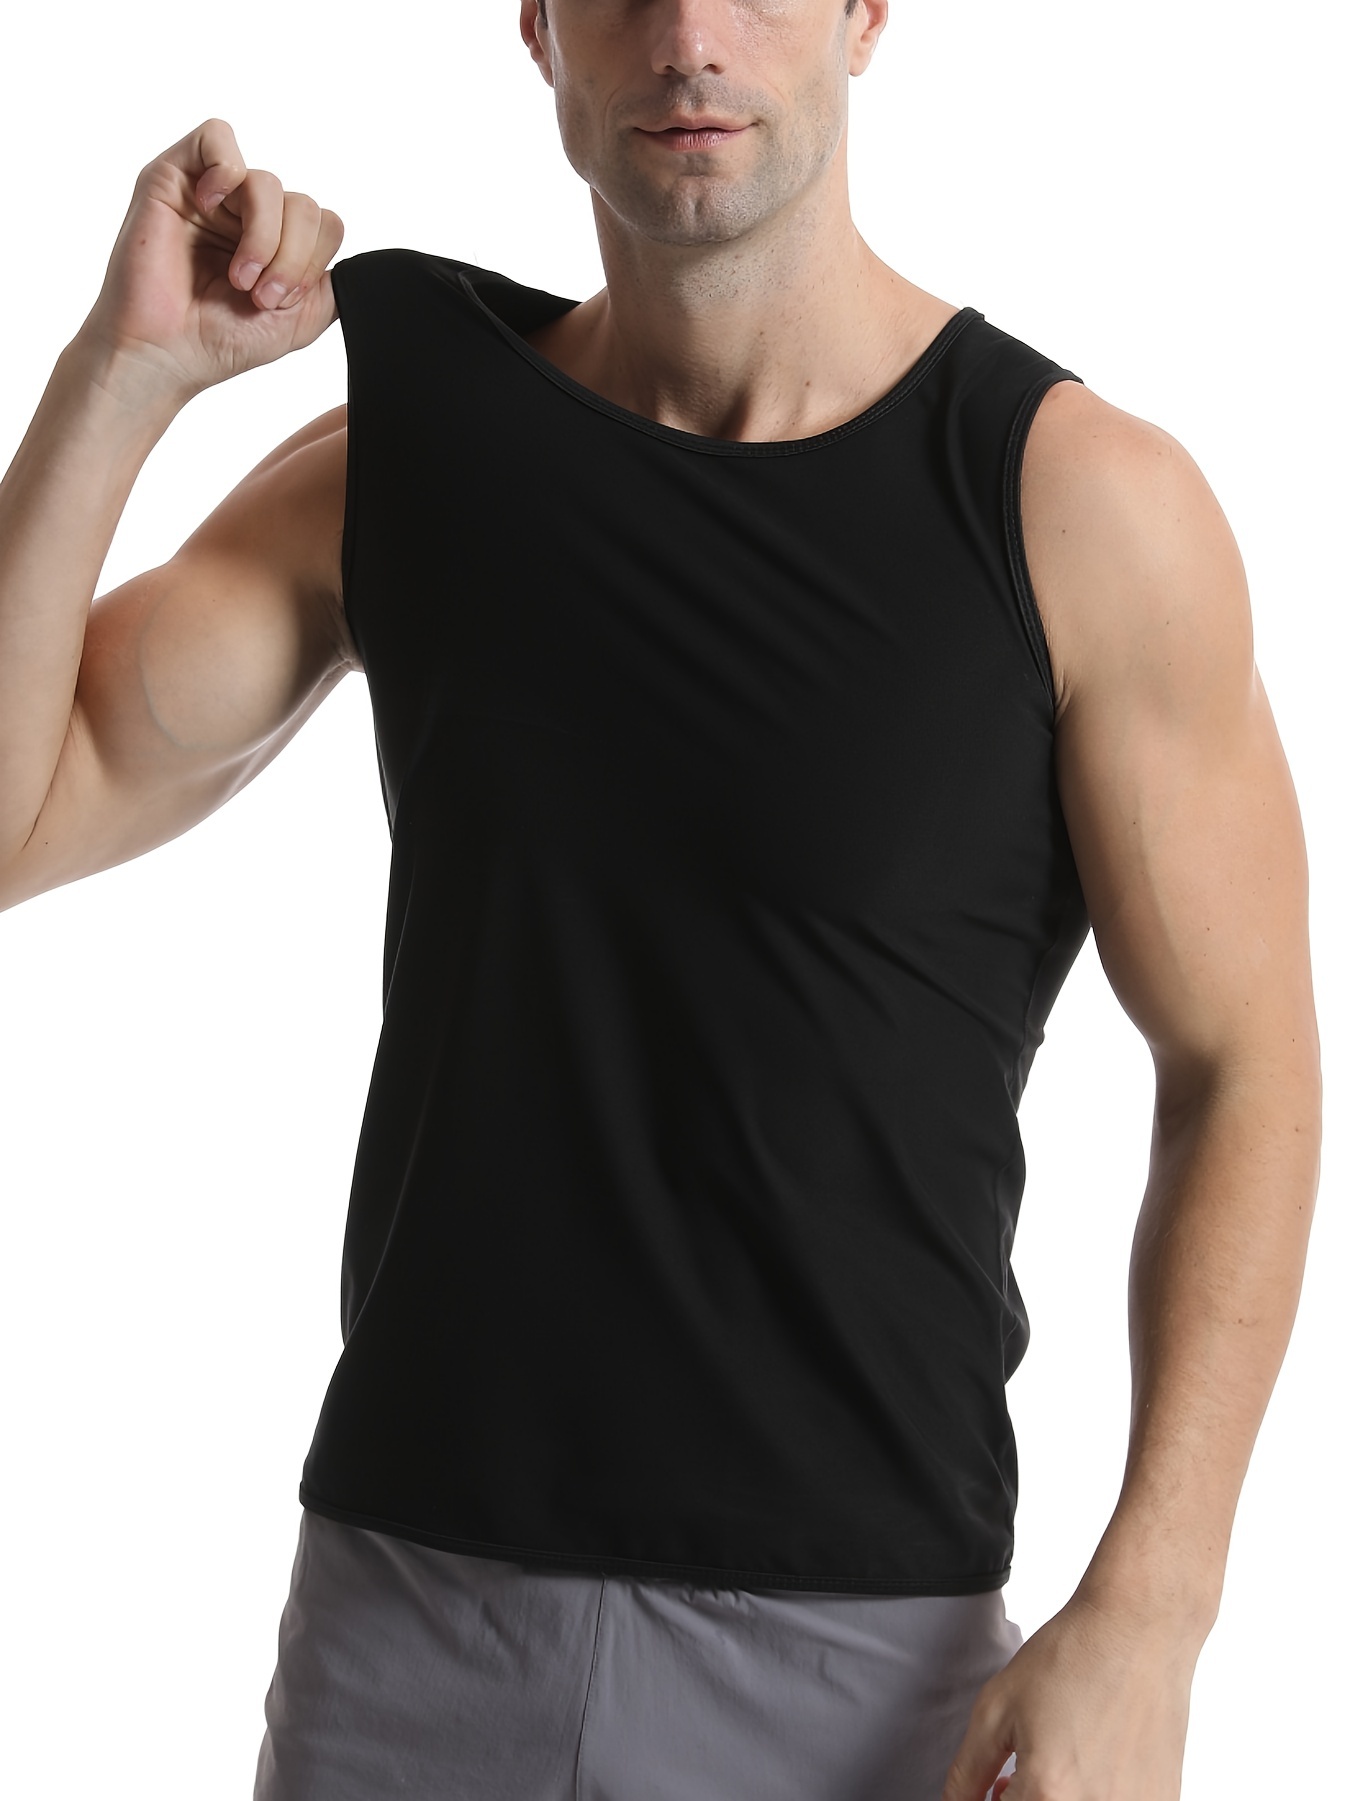 Mens Gym Wear Singlet Top Training Exercise Sports Vest Body